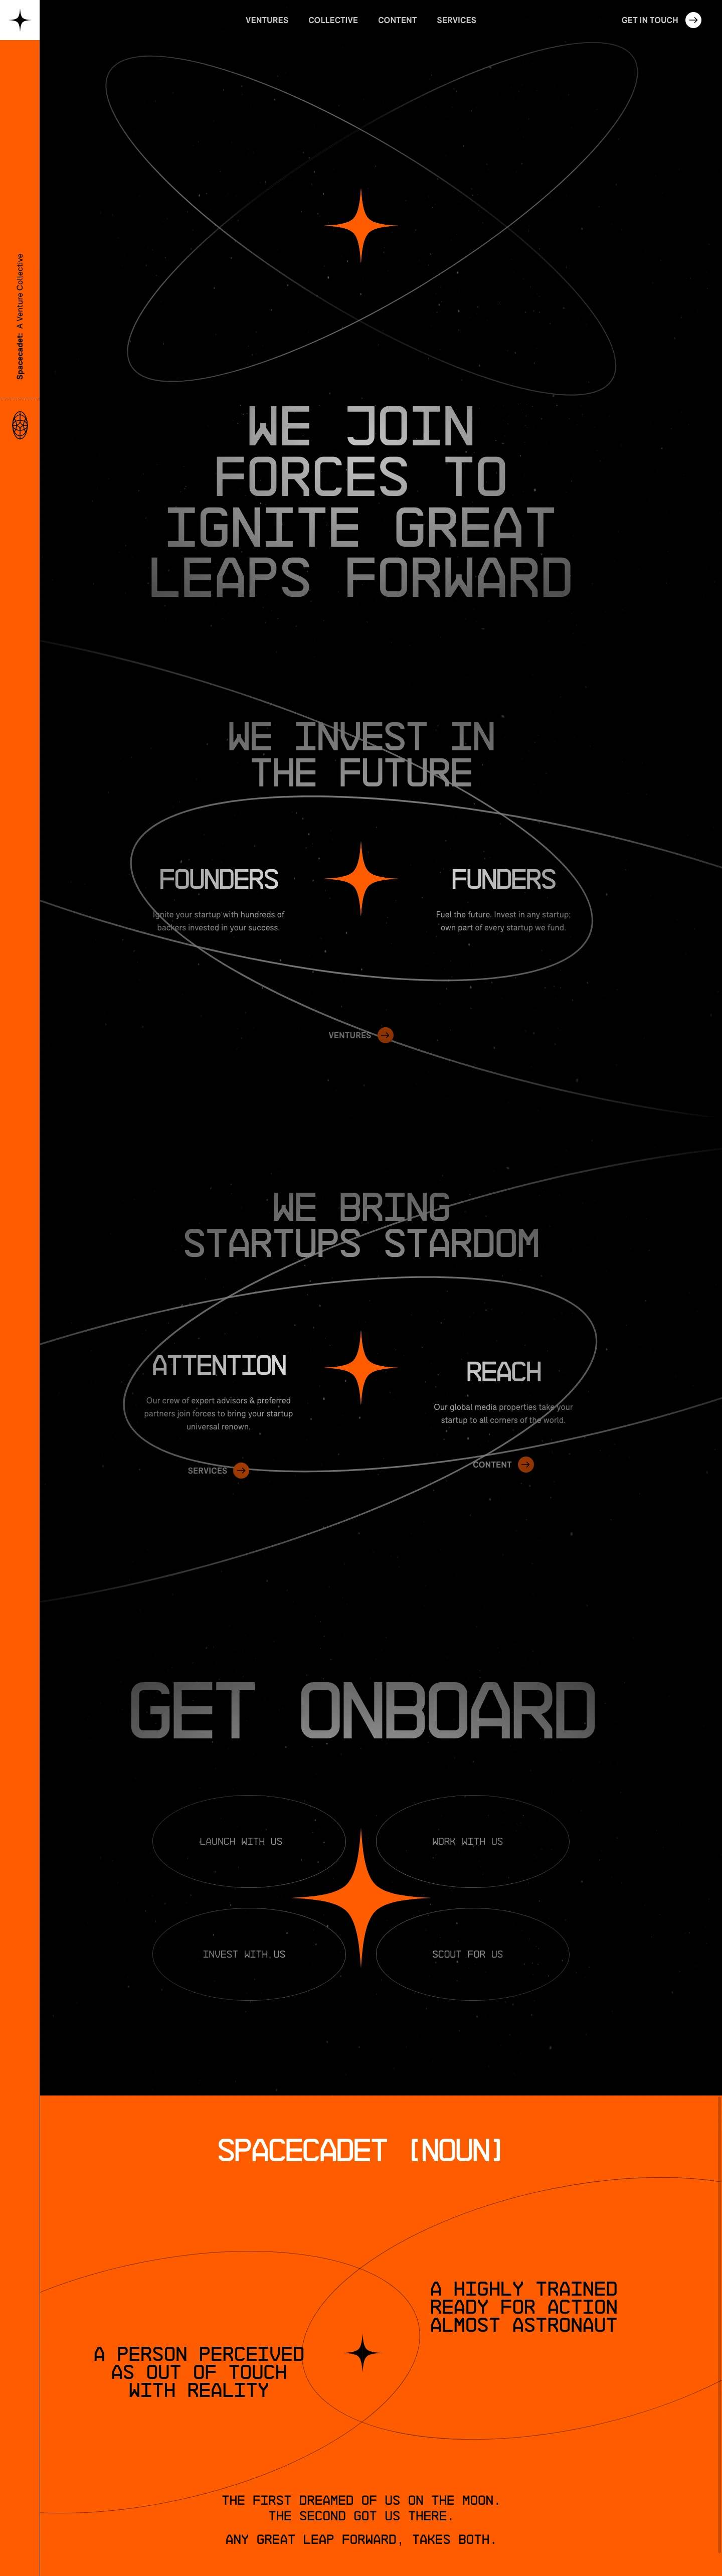 Spacecadet Landing Page Example: We join forces to ignite great leaps forward.